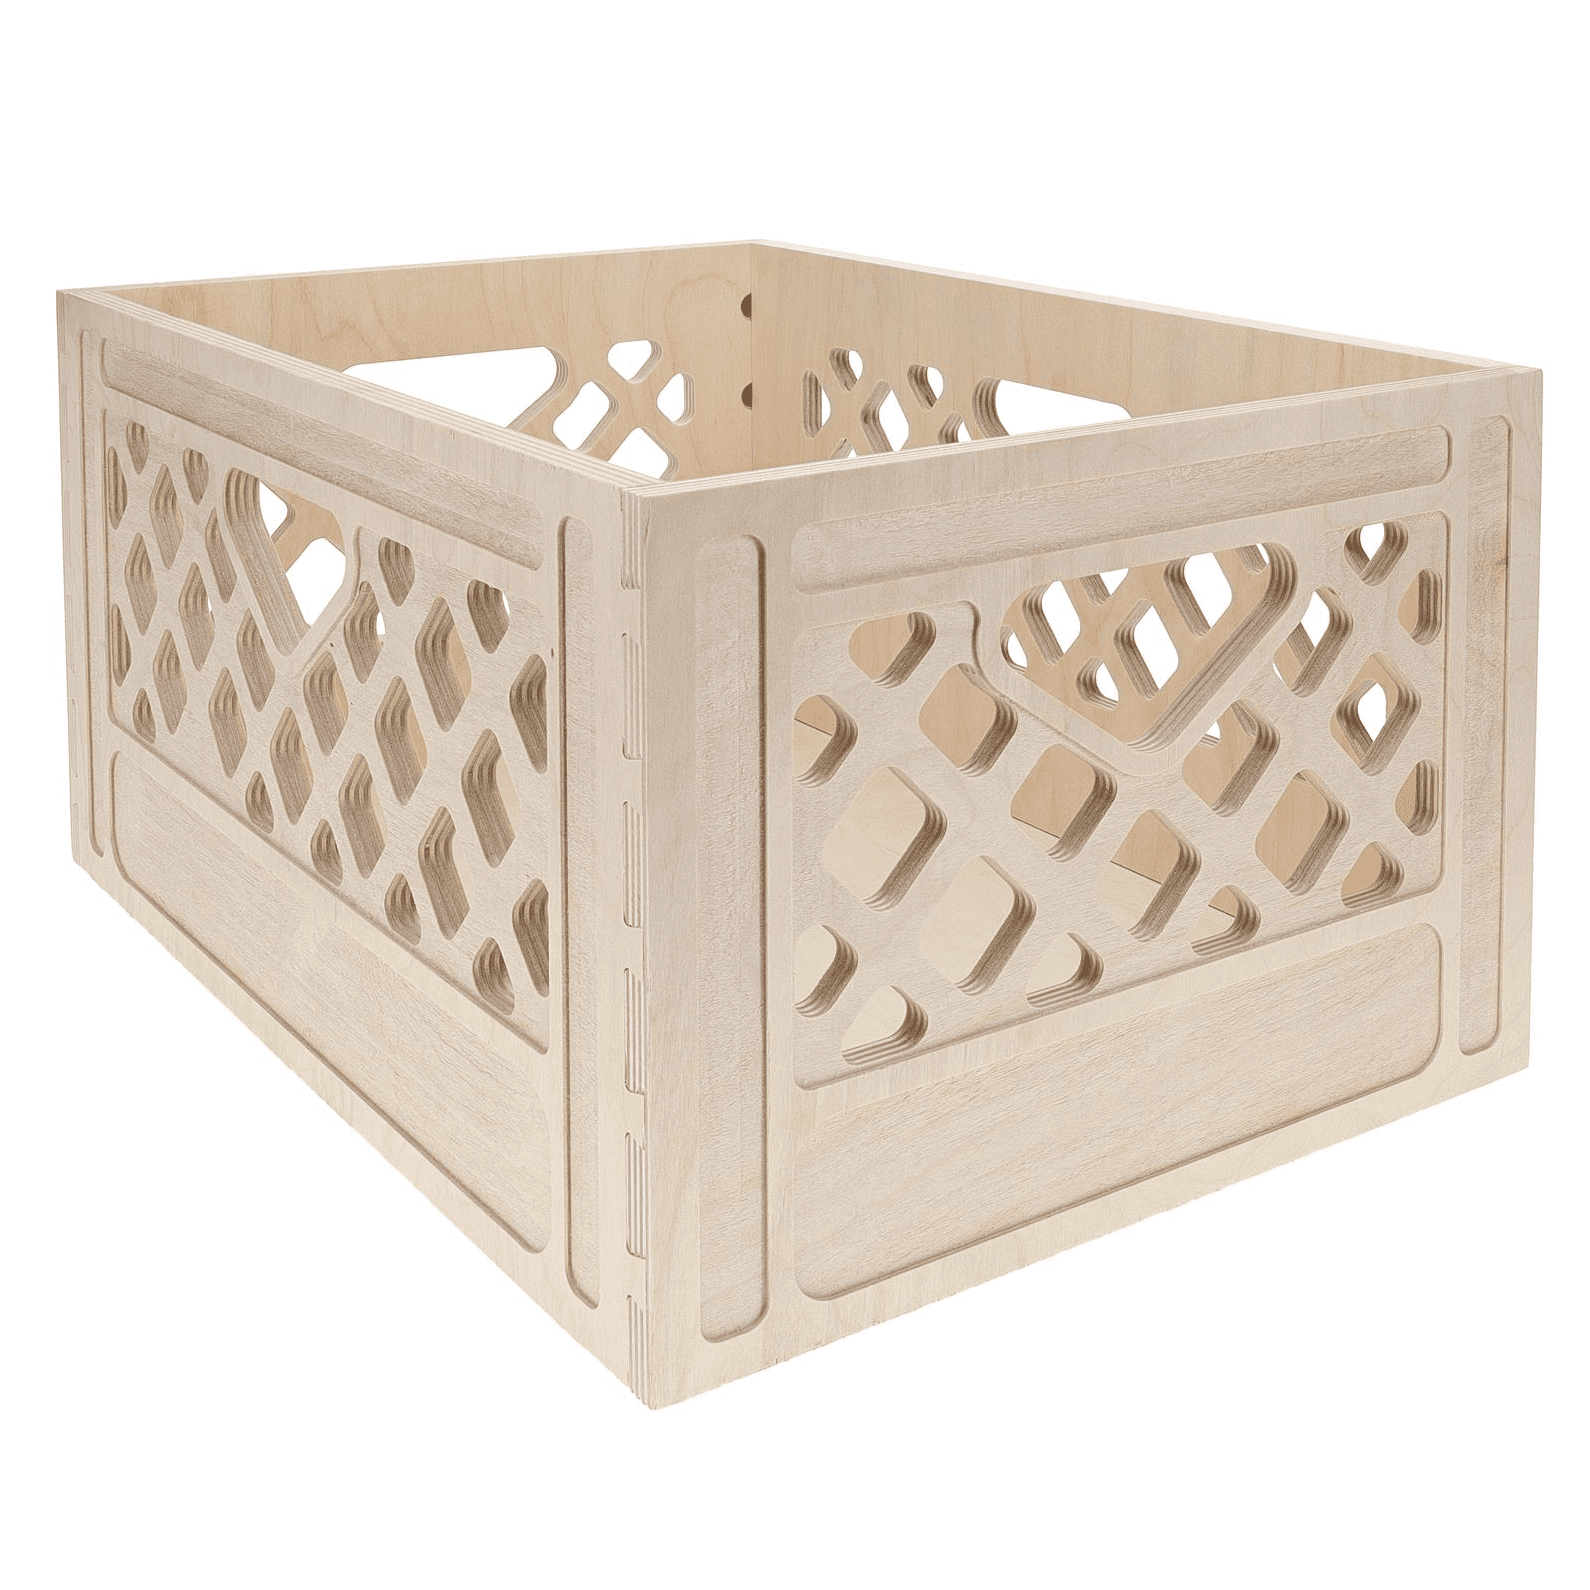 Good Wood by Leisure Arts Wooden Milk Crate, wood crate classic